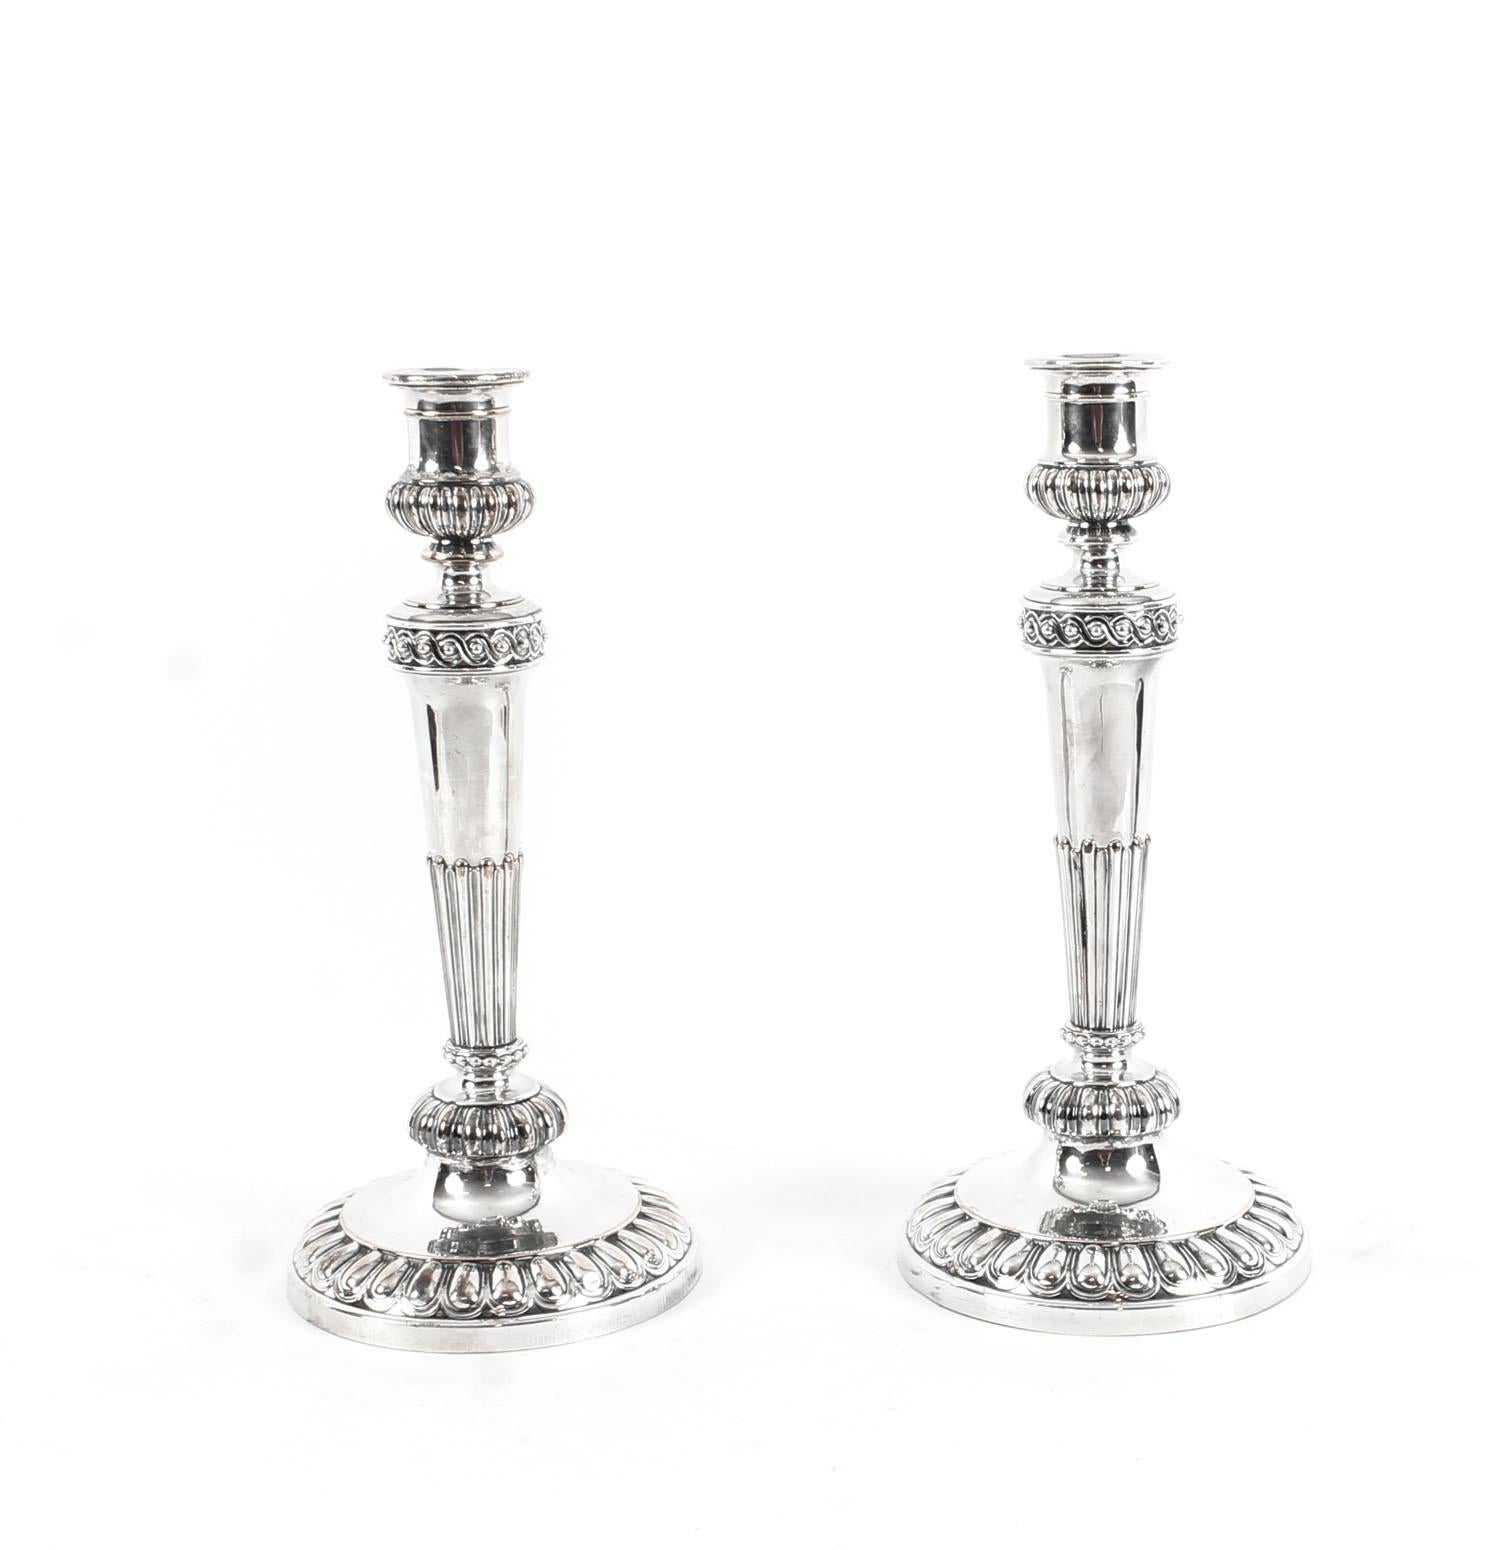 Sheffield Plate Antique Pair of George IV 3 Light Old Sheffield Candelabra, 19th Century